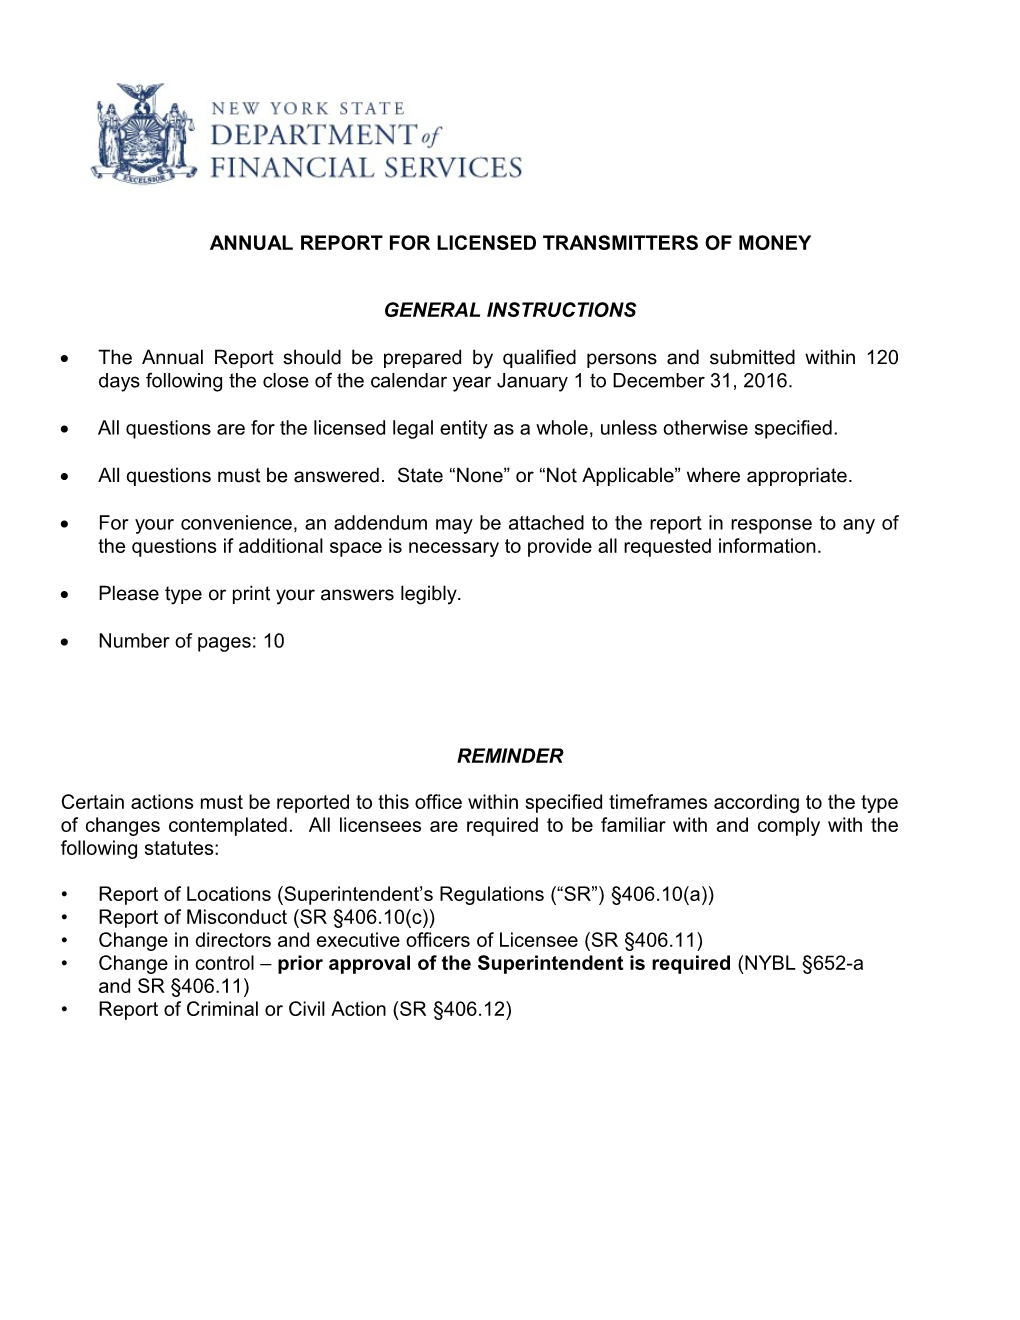 Annual Report for Licensed Transmittersof Money